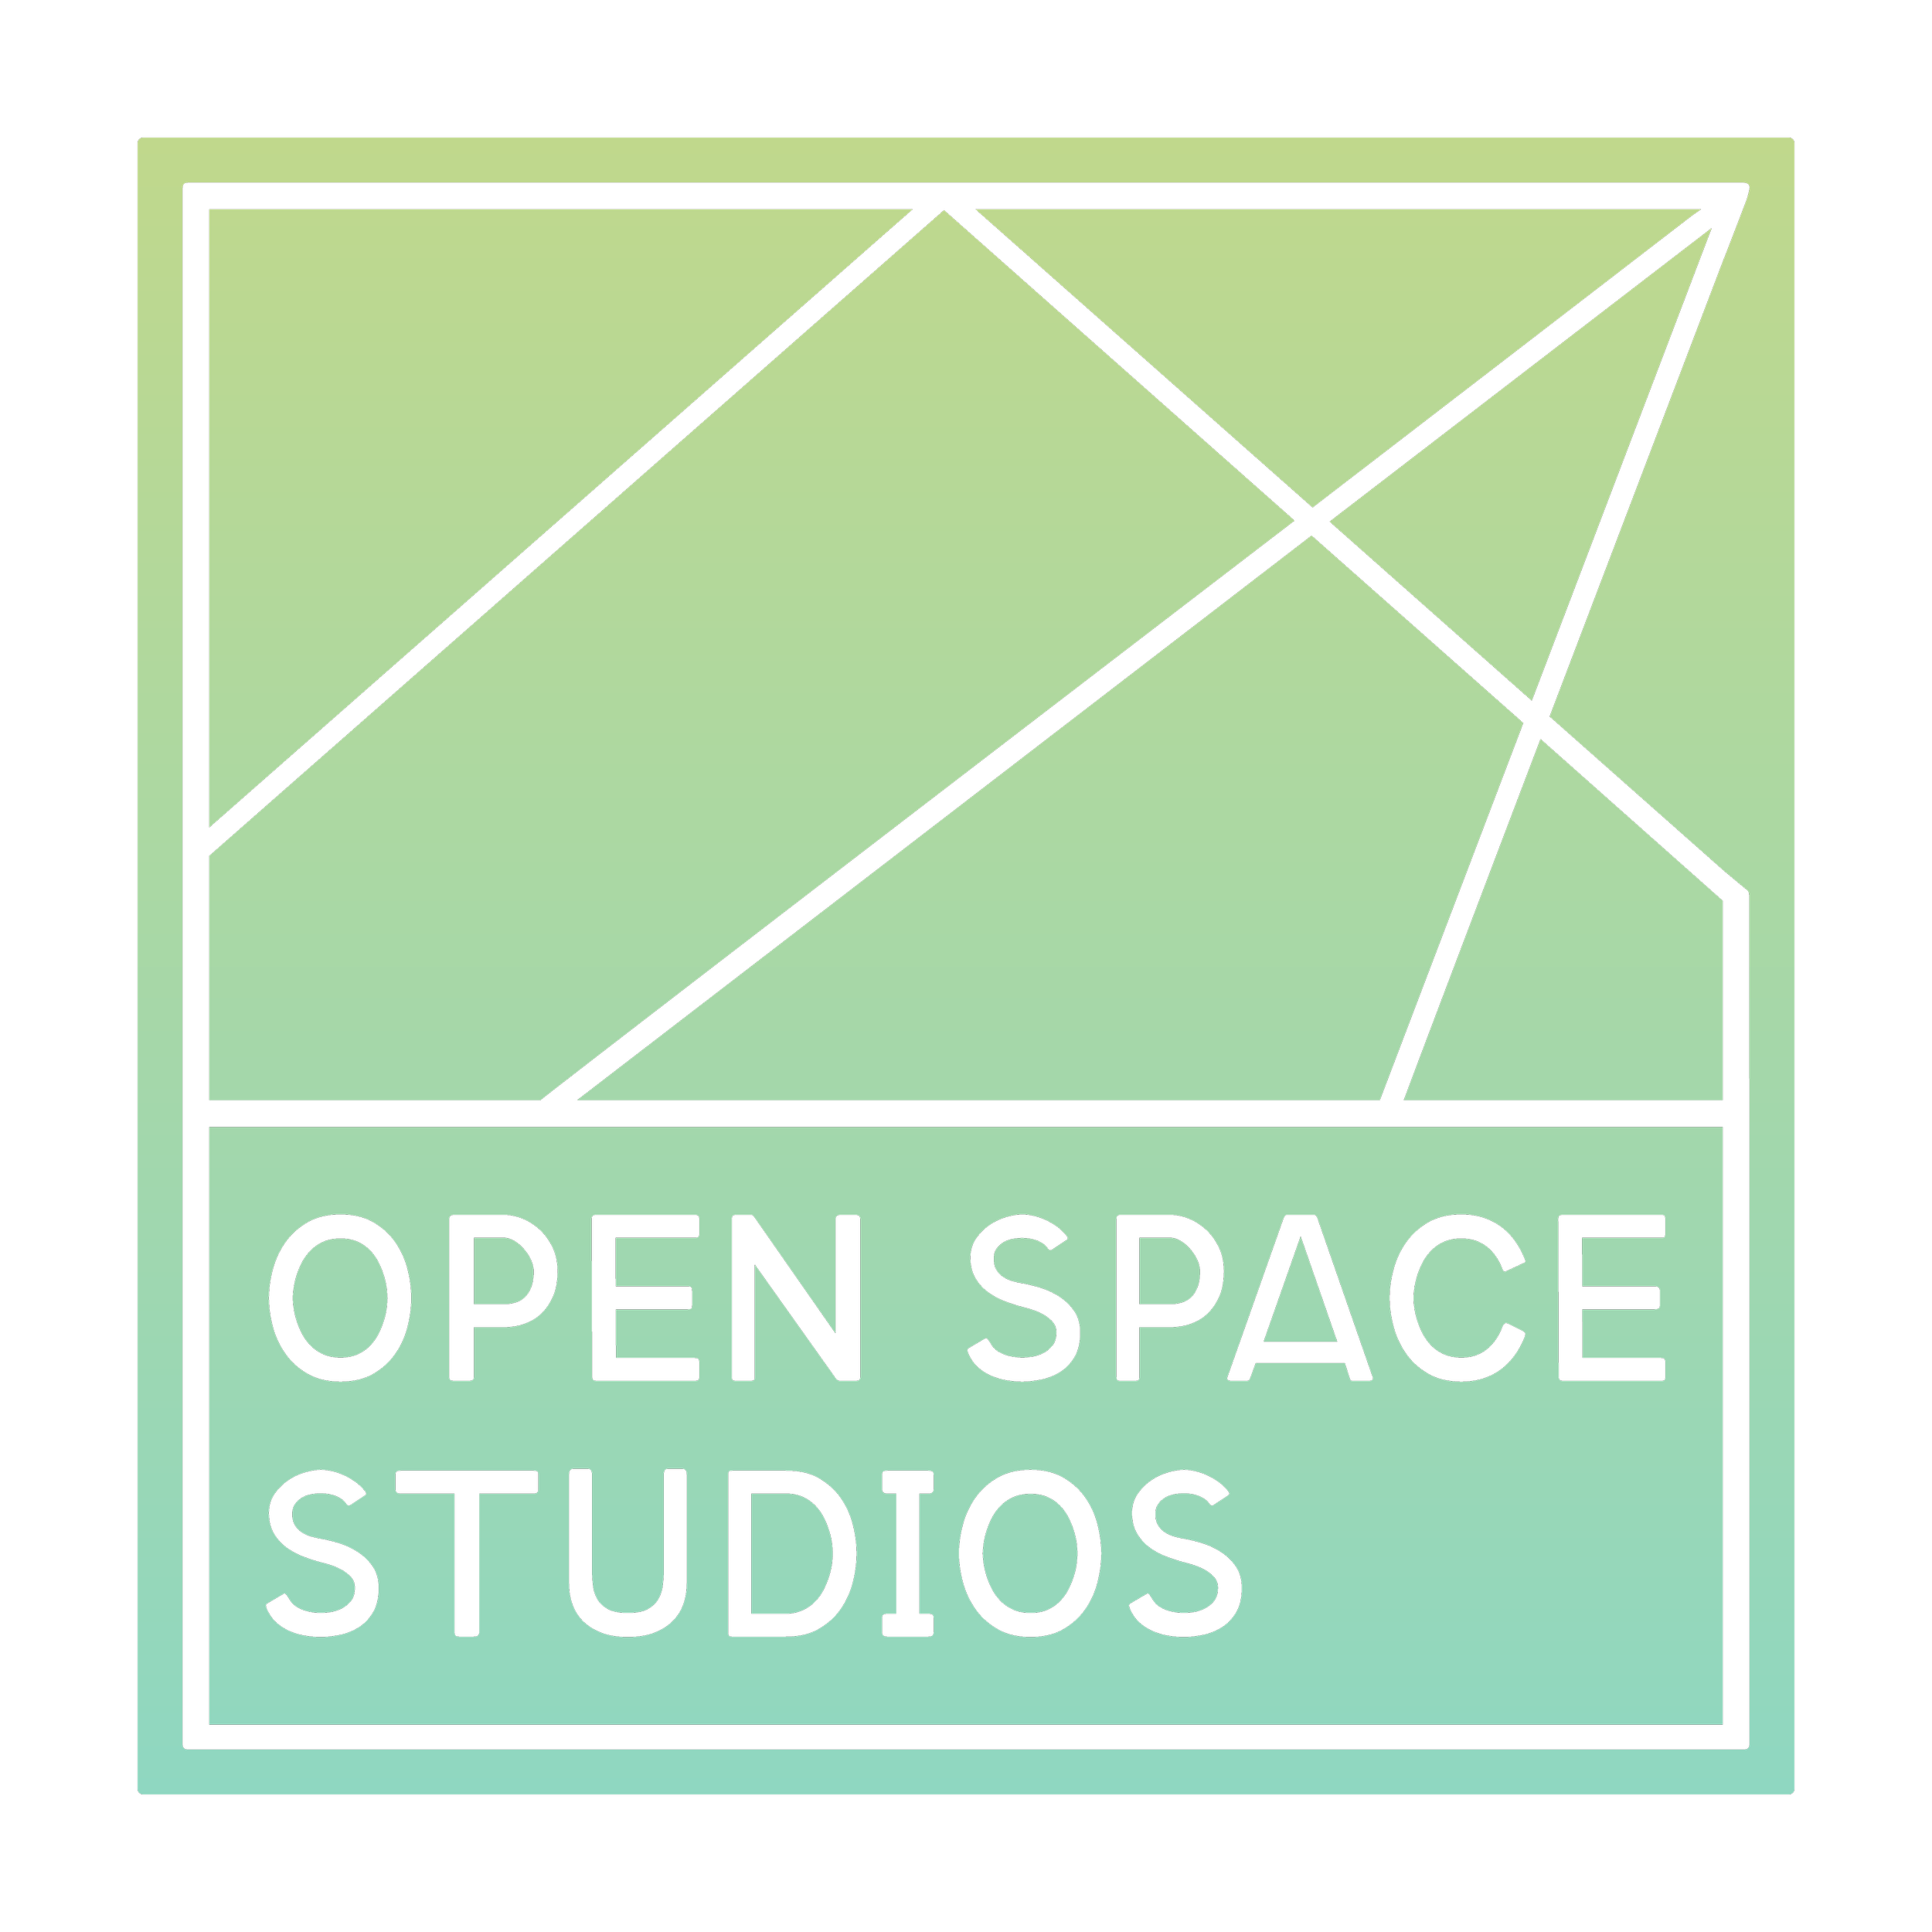 Finals_Open Space Studios - filled square gradient blue-green.png